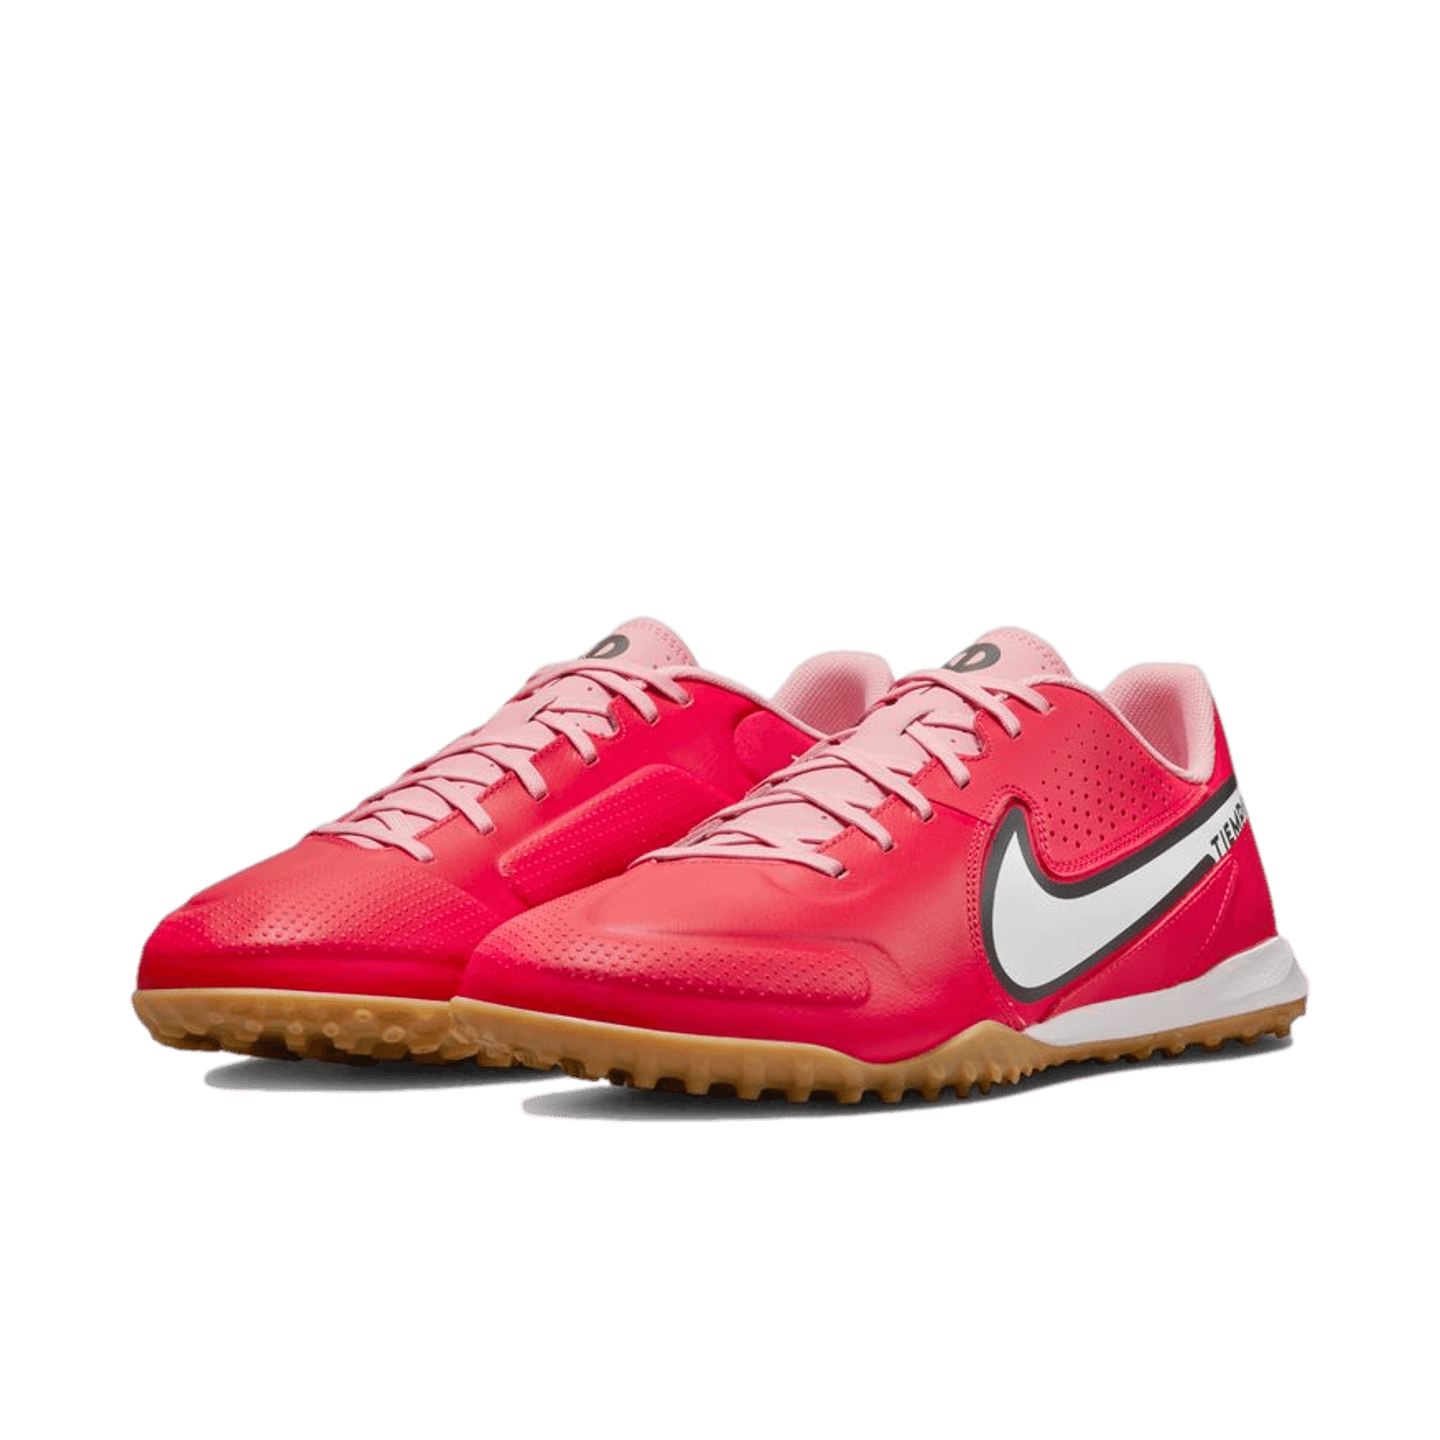 Nike Tiempo Legend 9 Academy Turf Soccer Shoes - Red